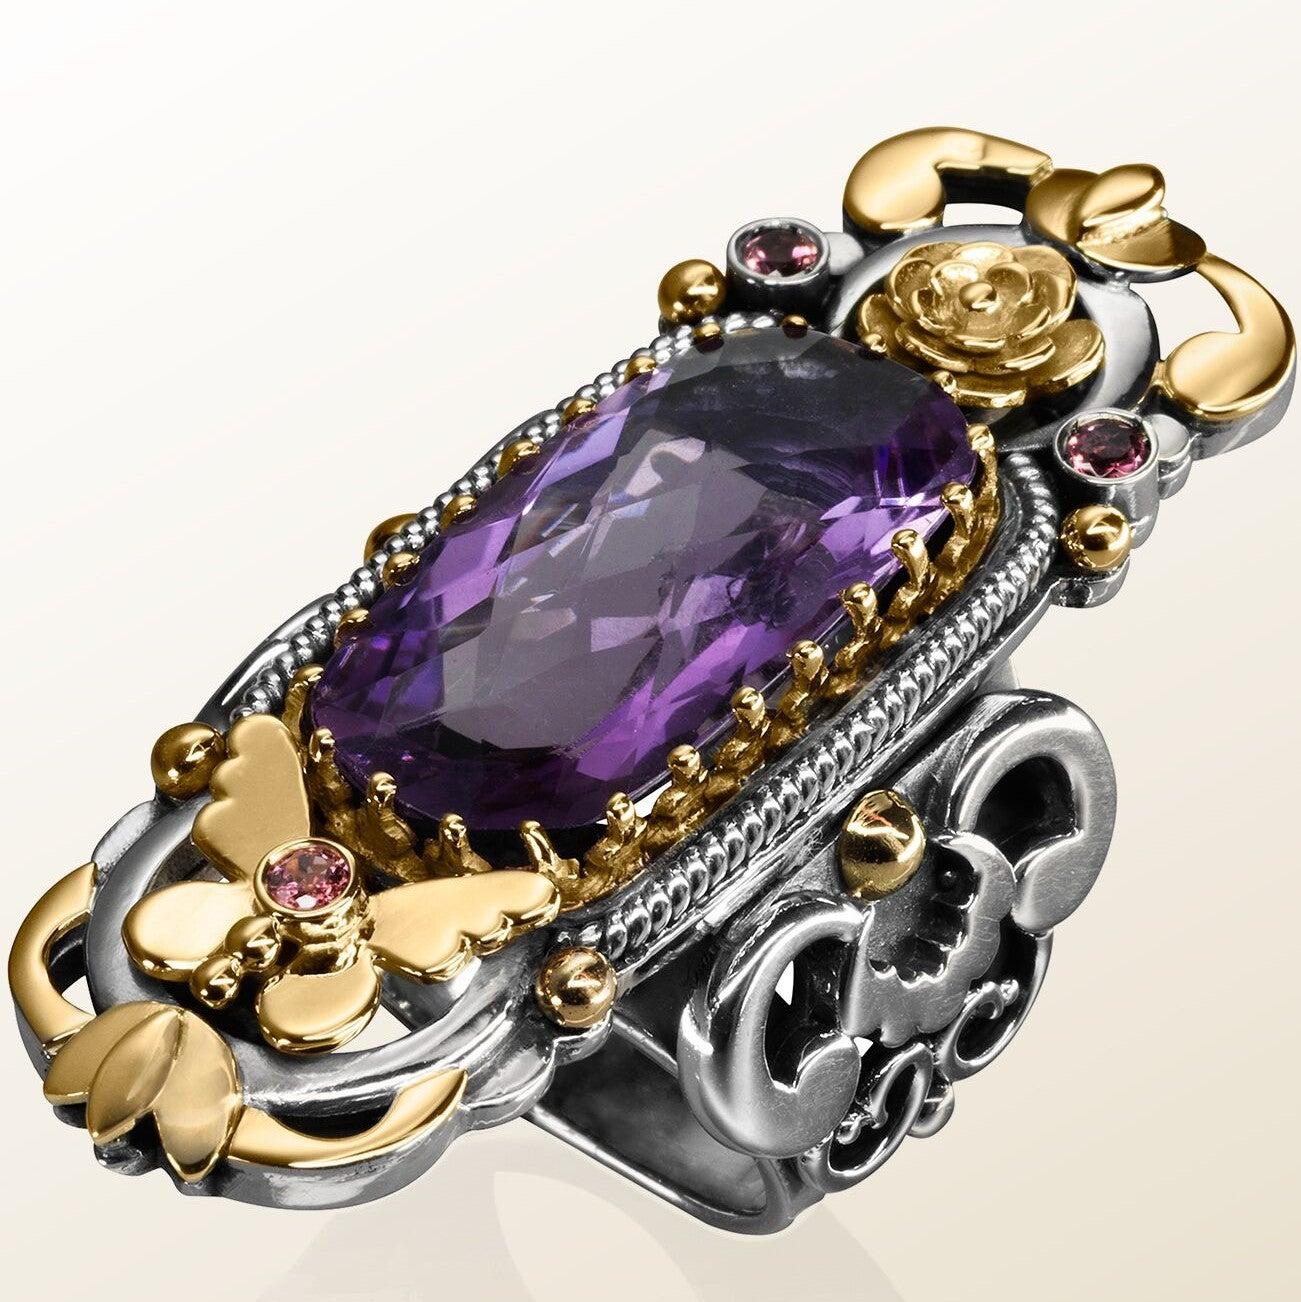 For Sale:  18 Karat Gold, Sterling Silver, Amethyst and Pink Tourmaline Limited Garden Ring 4